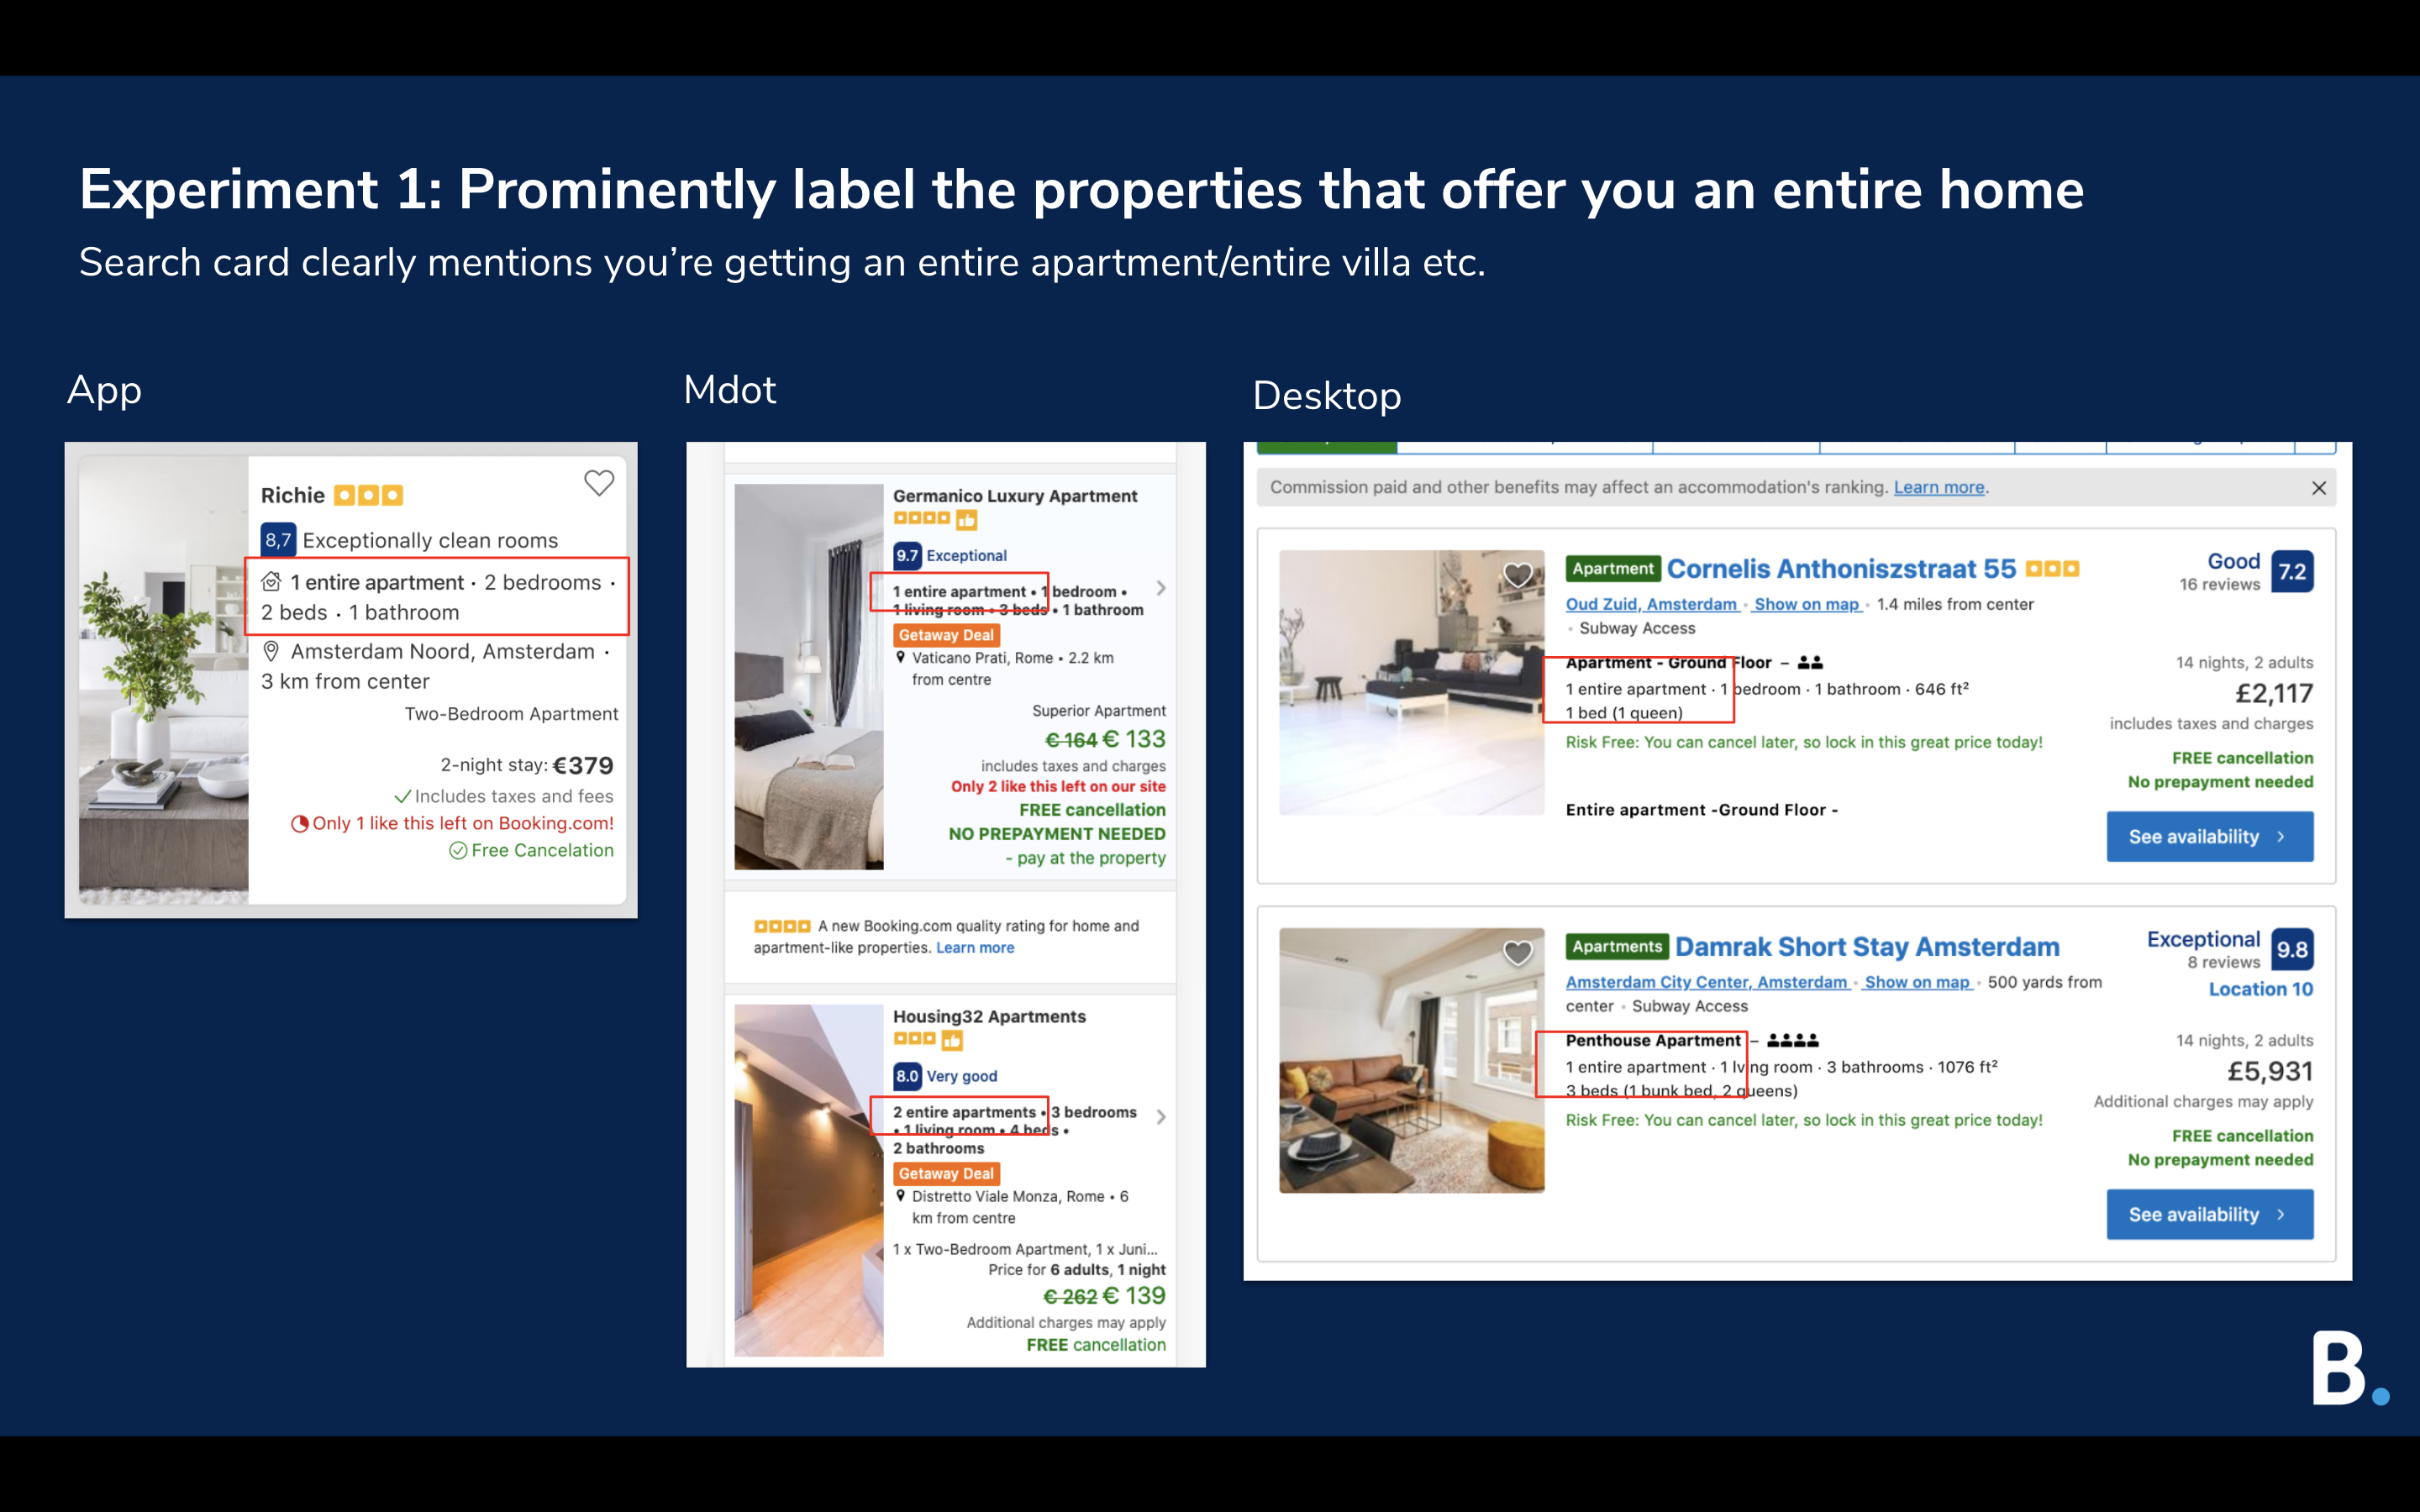 Experiment 1: Prominently label the properties that offer you an entire home